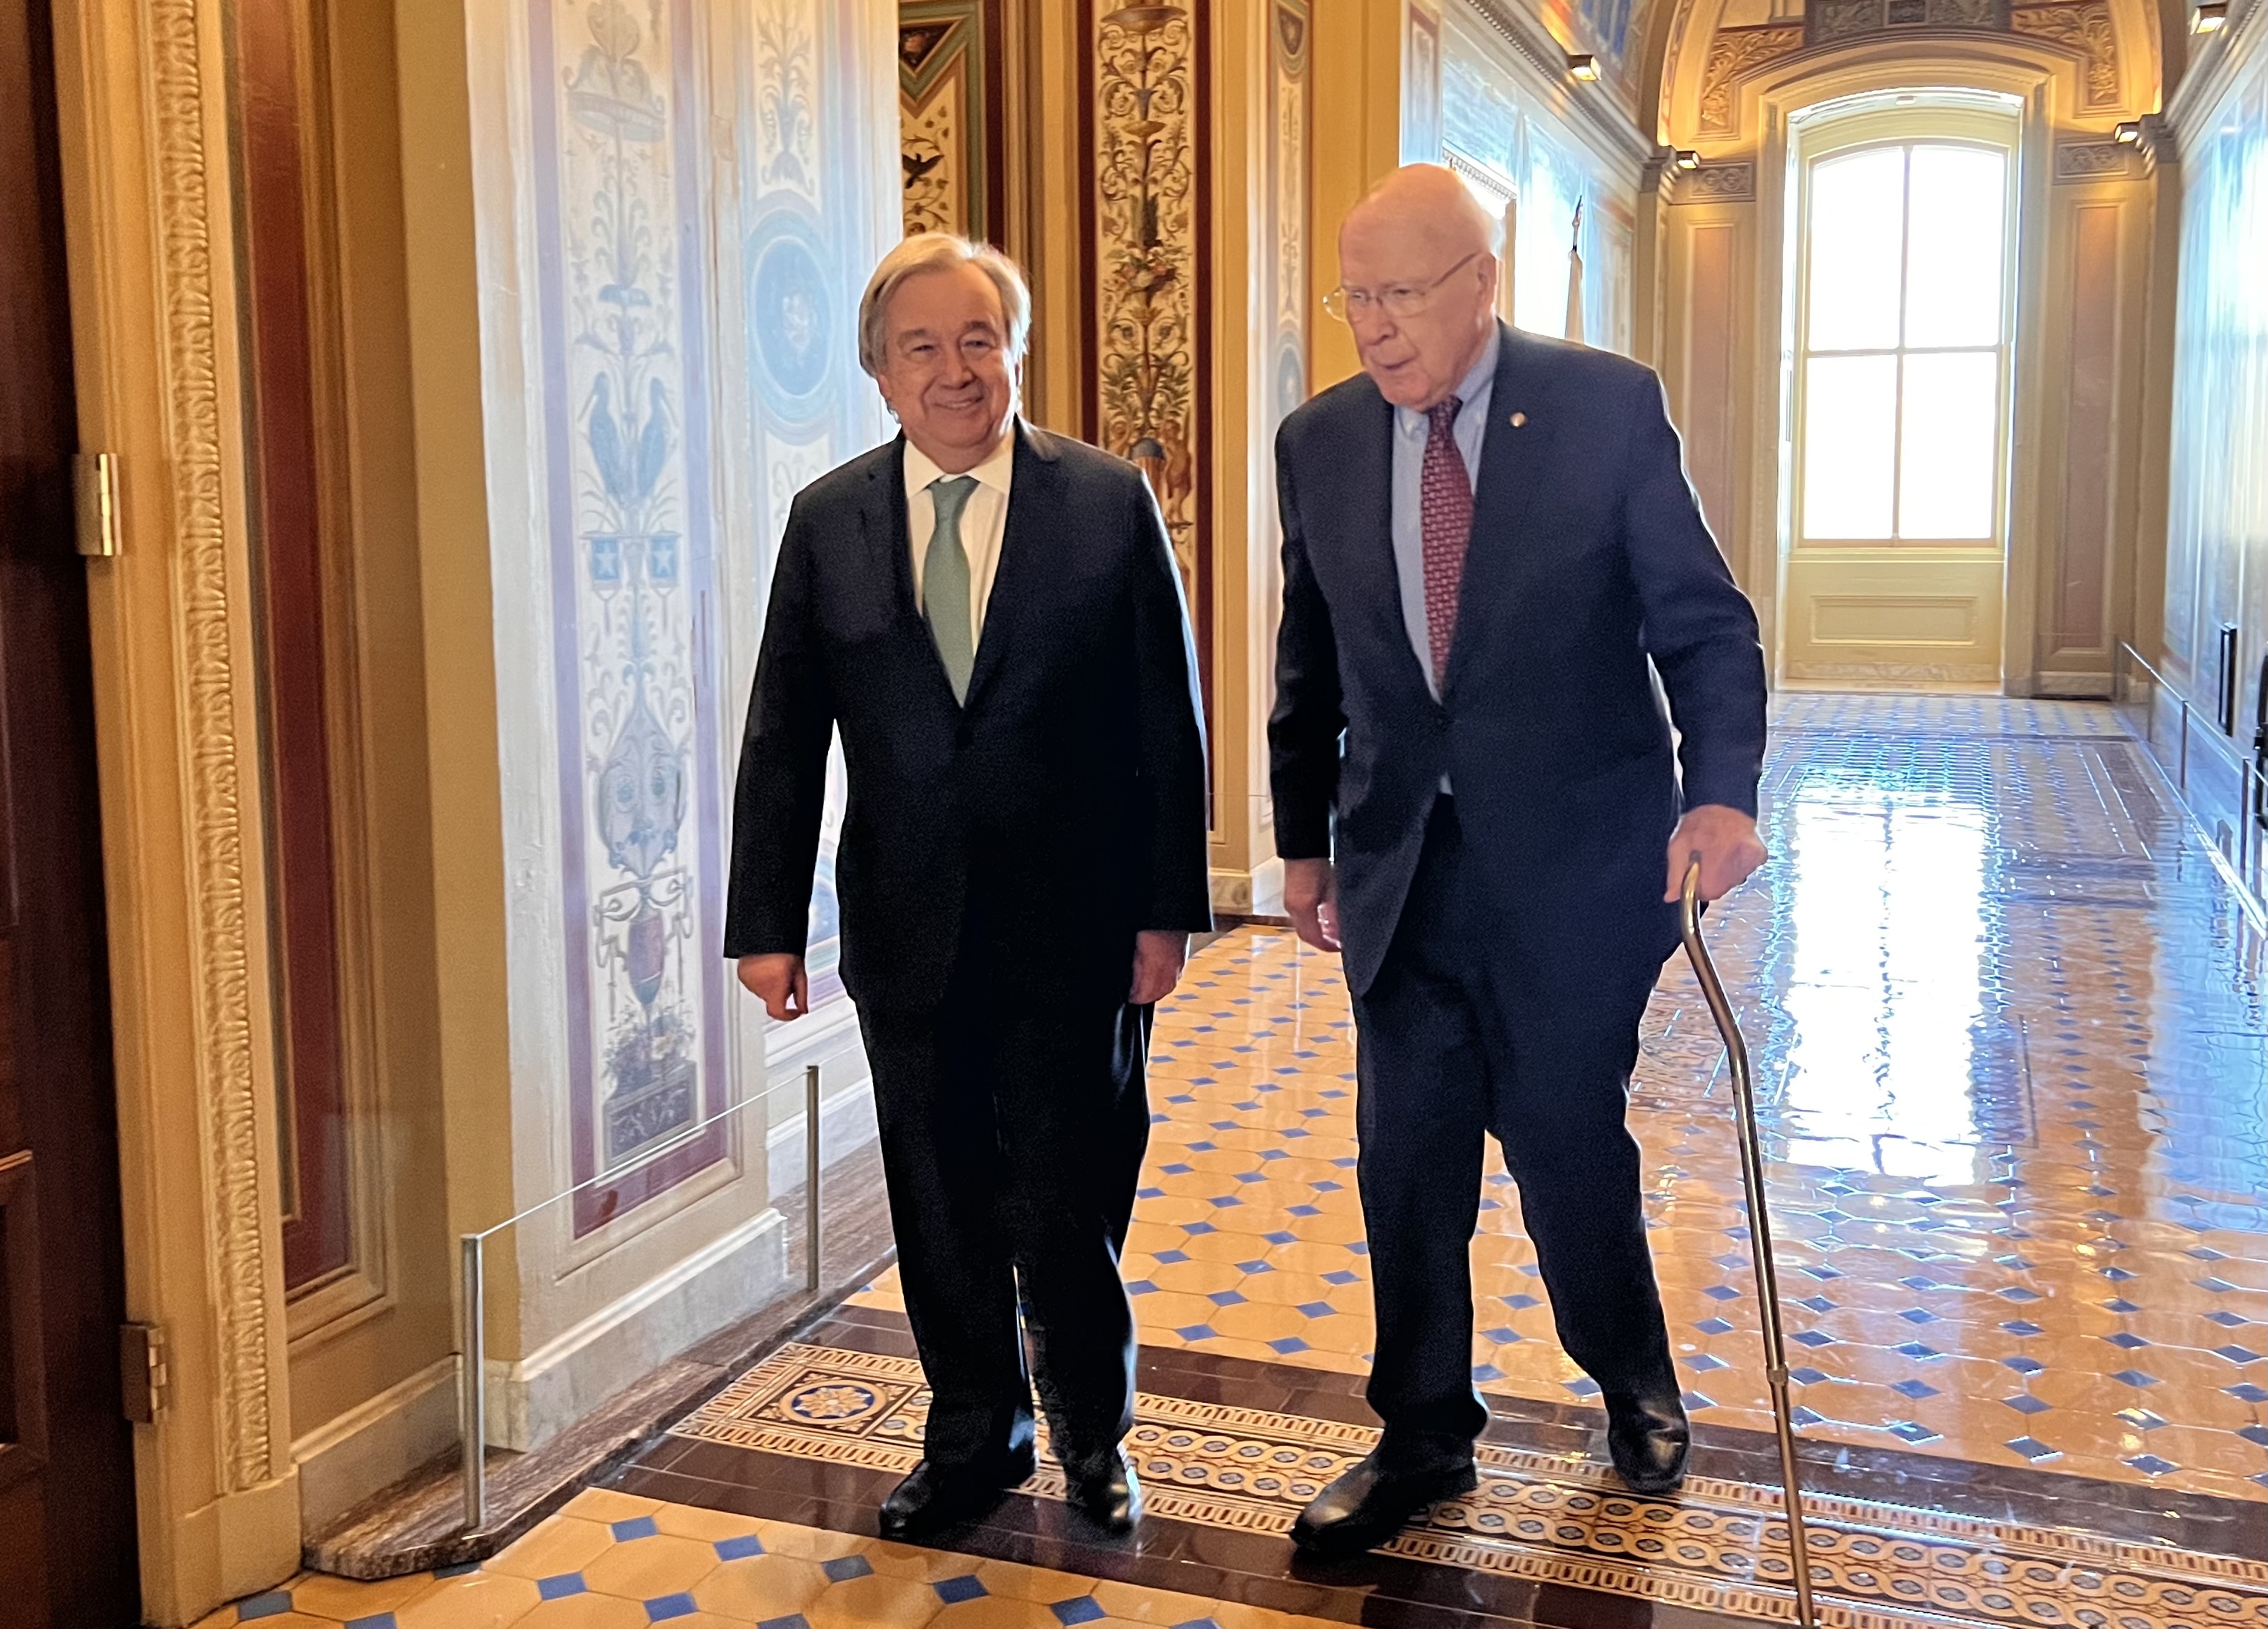 UN Secretary-General António Guterres (left) and Senator Patrick Leahy, President Pro Tempore of the Senate, at the US Capitol